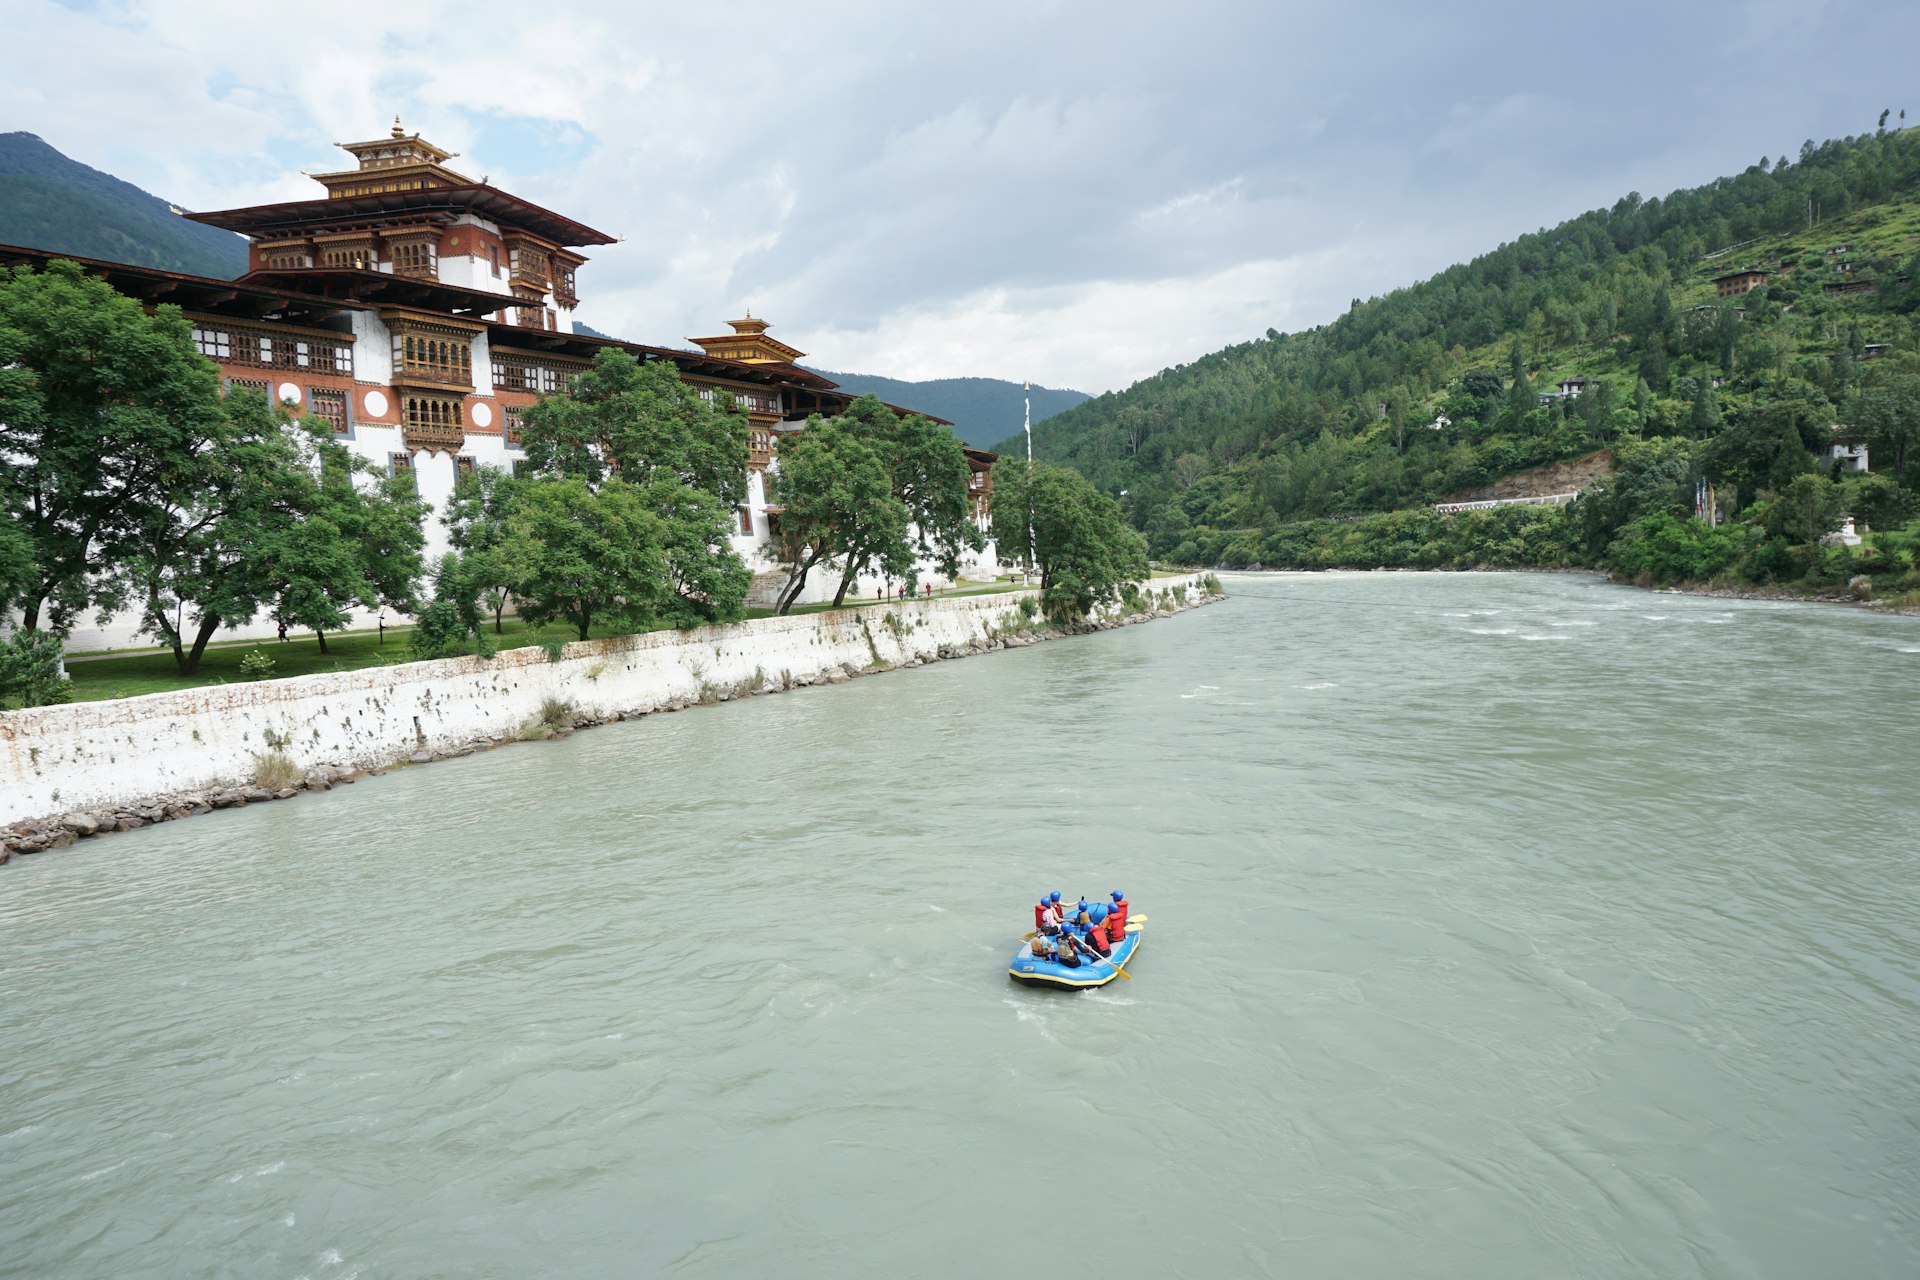 A group in a raft by the river in front of Punakha Dzong, Punakha, Bhutan